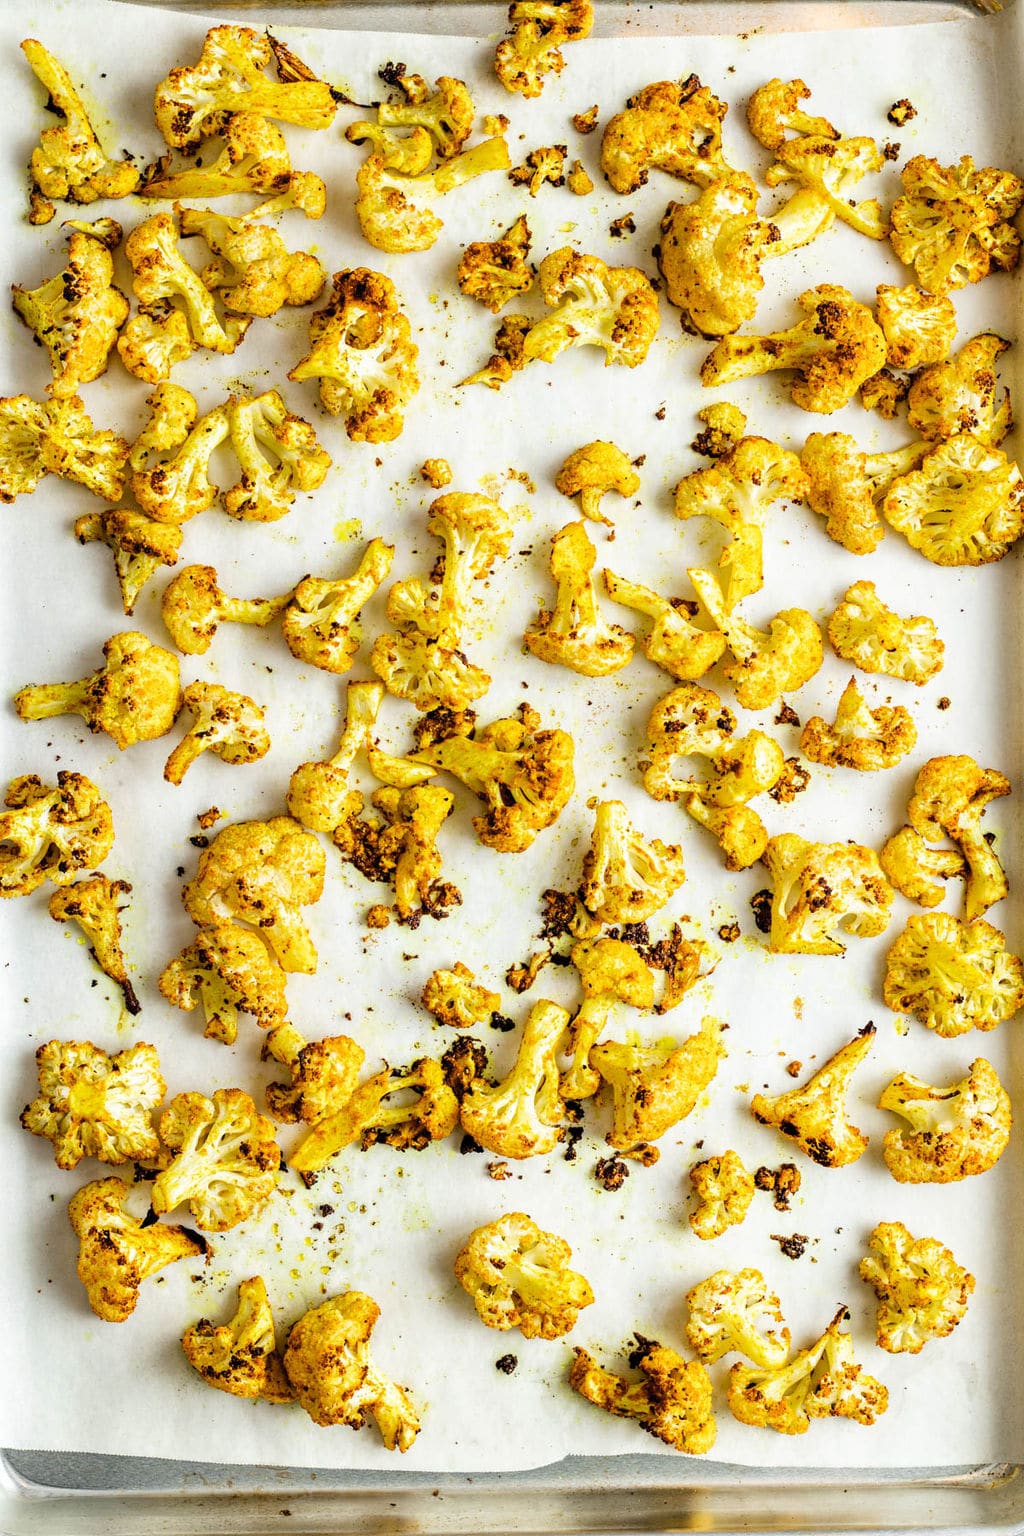 Yellow curry-seasoned roasted cauliflower florets on a parchment lined baking sheet.